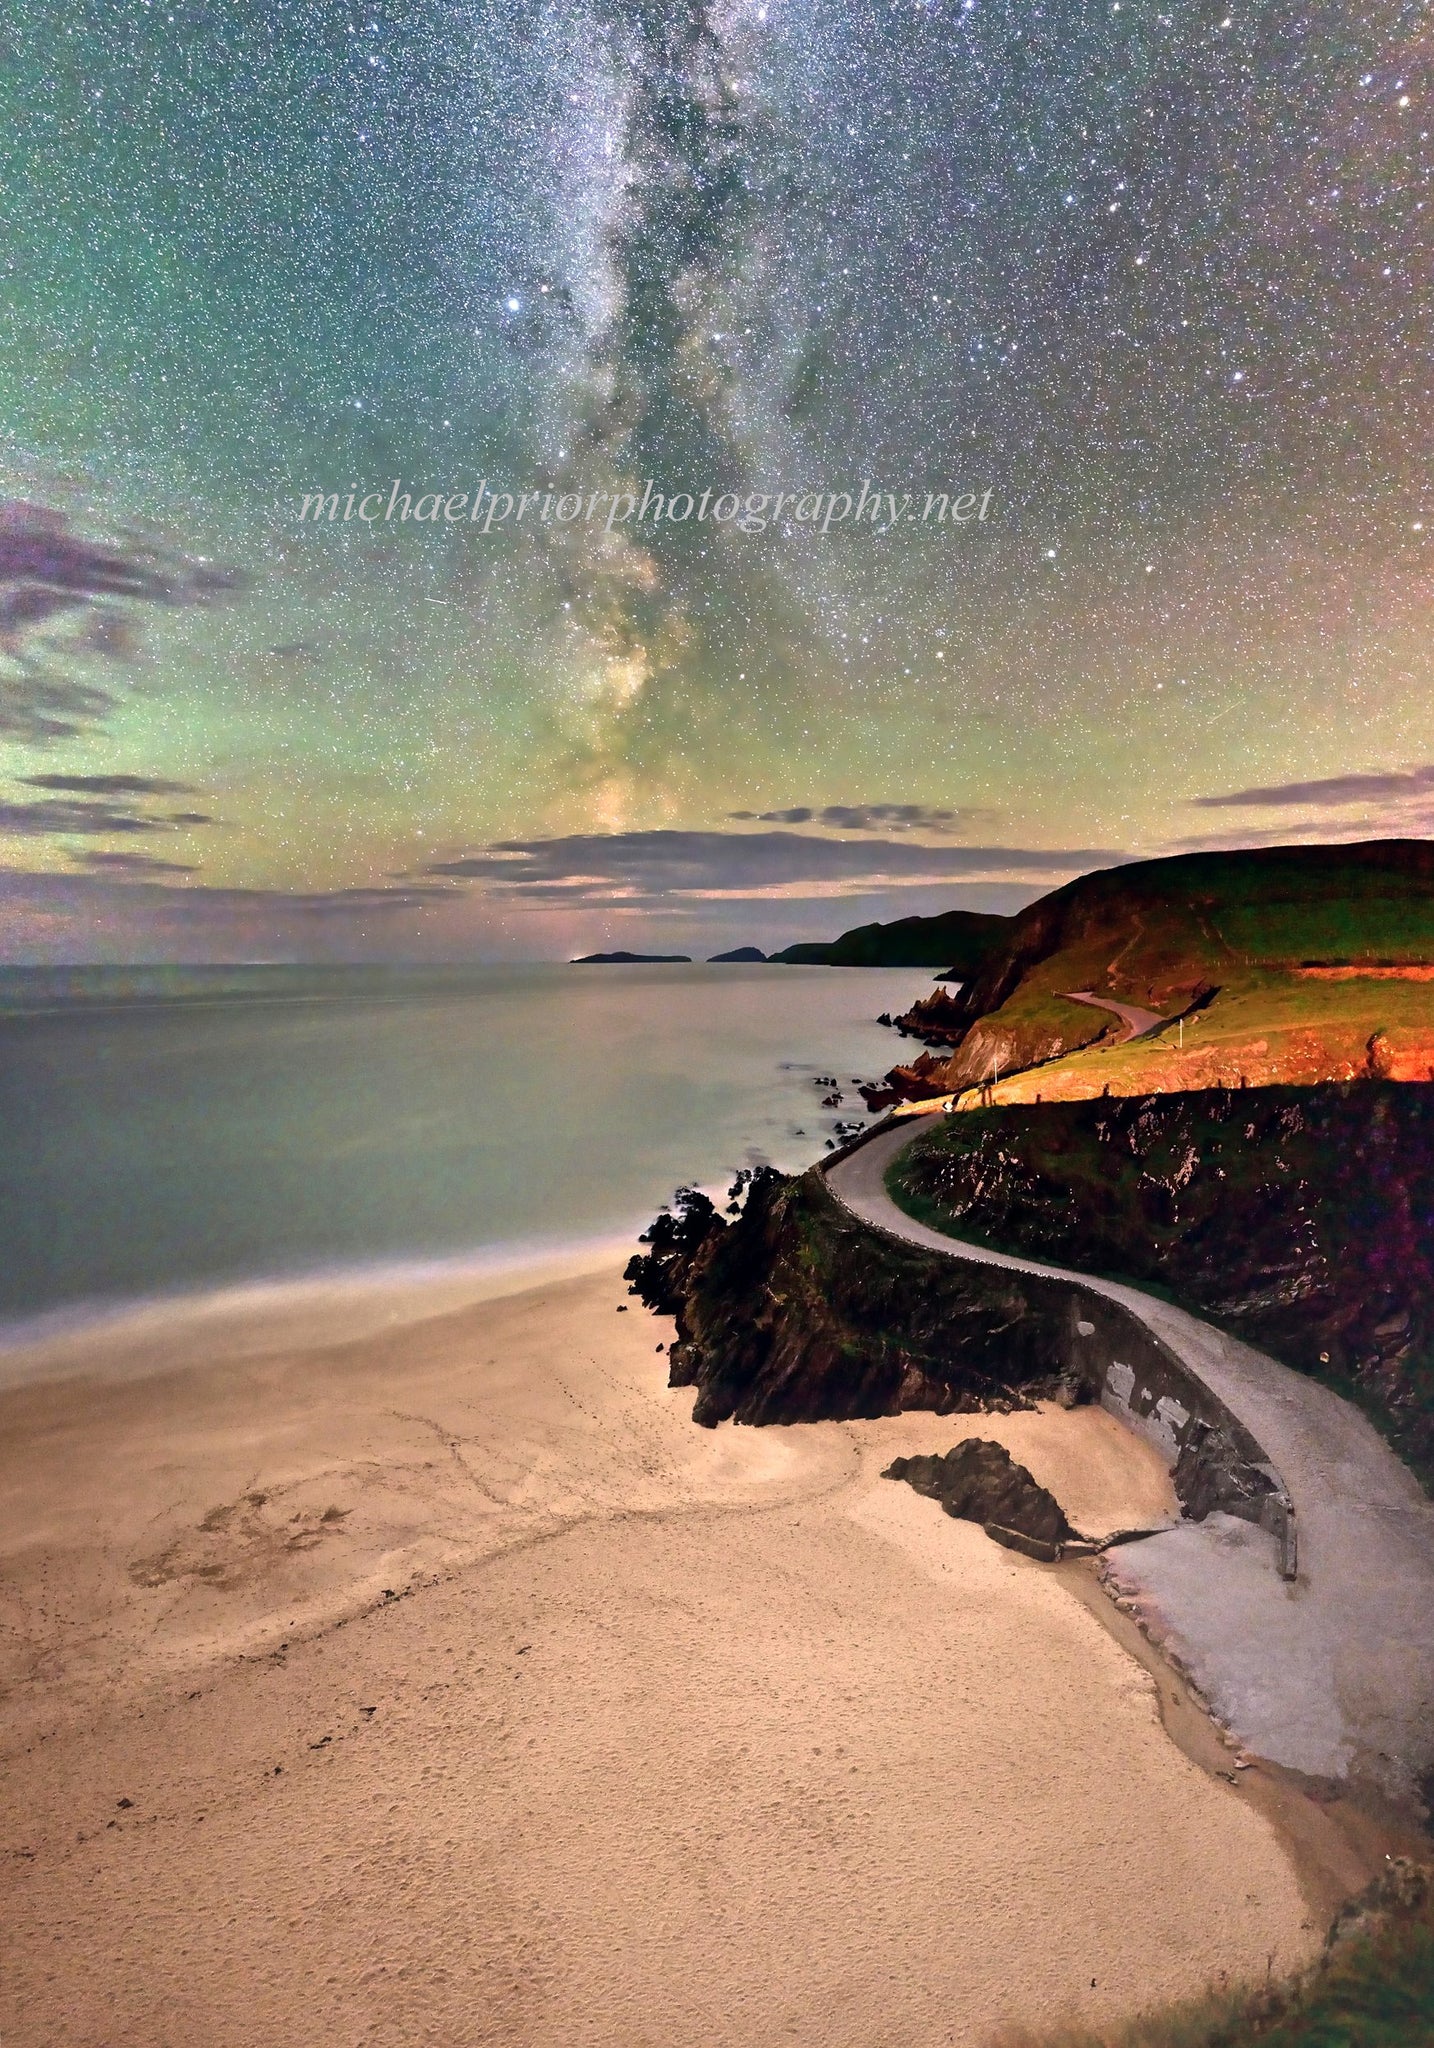 Coumeenole beach and the milkyway